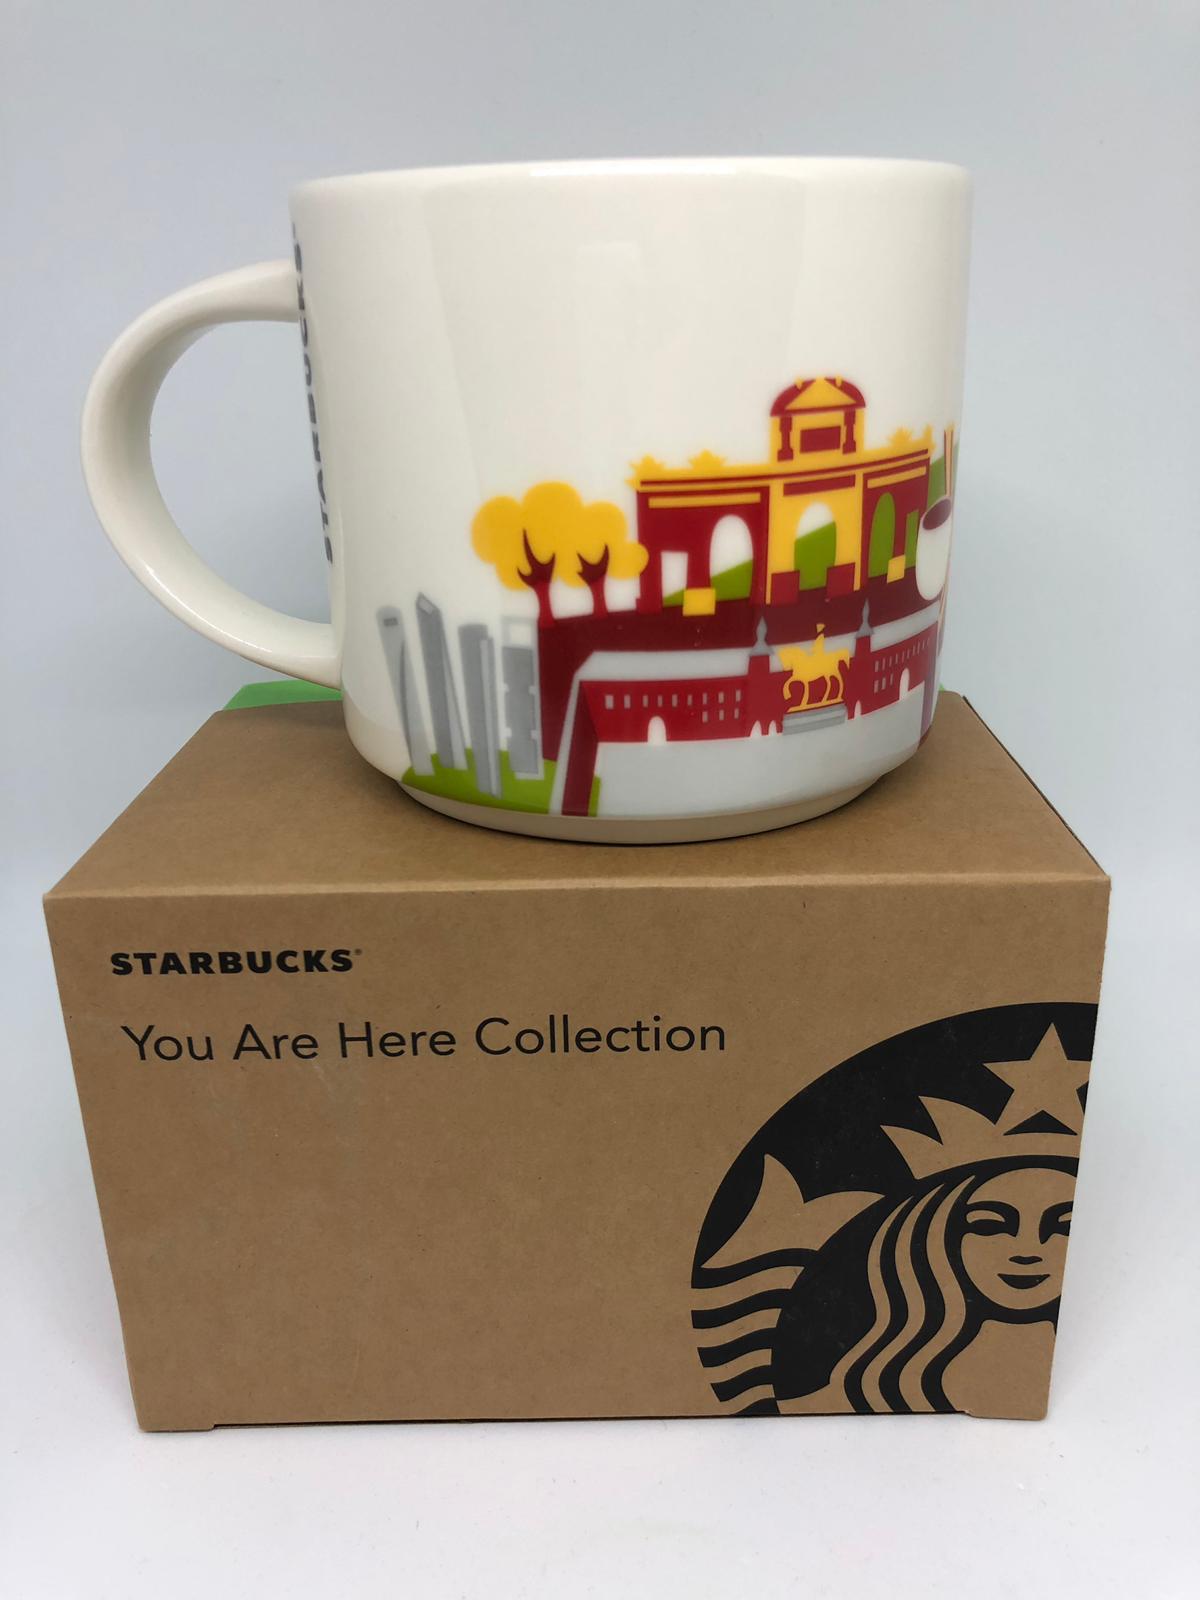 Starbucks You Are Here Collection Madrid Ceramic Coffee Mug New with Box